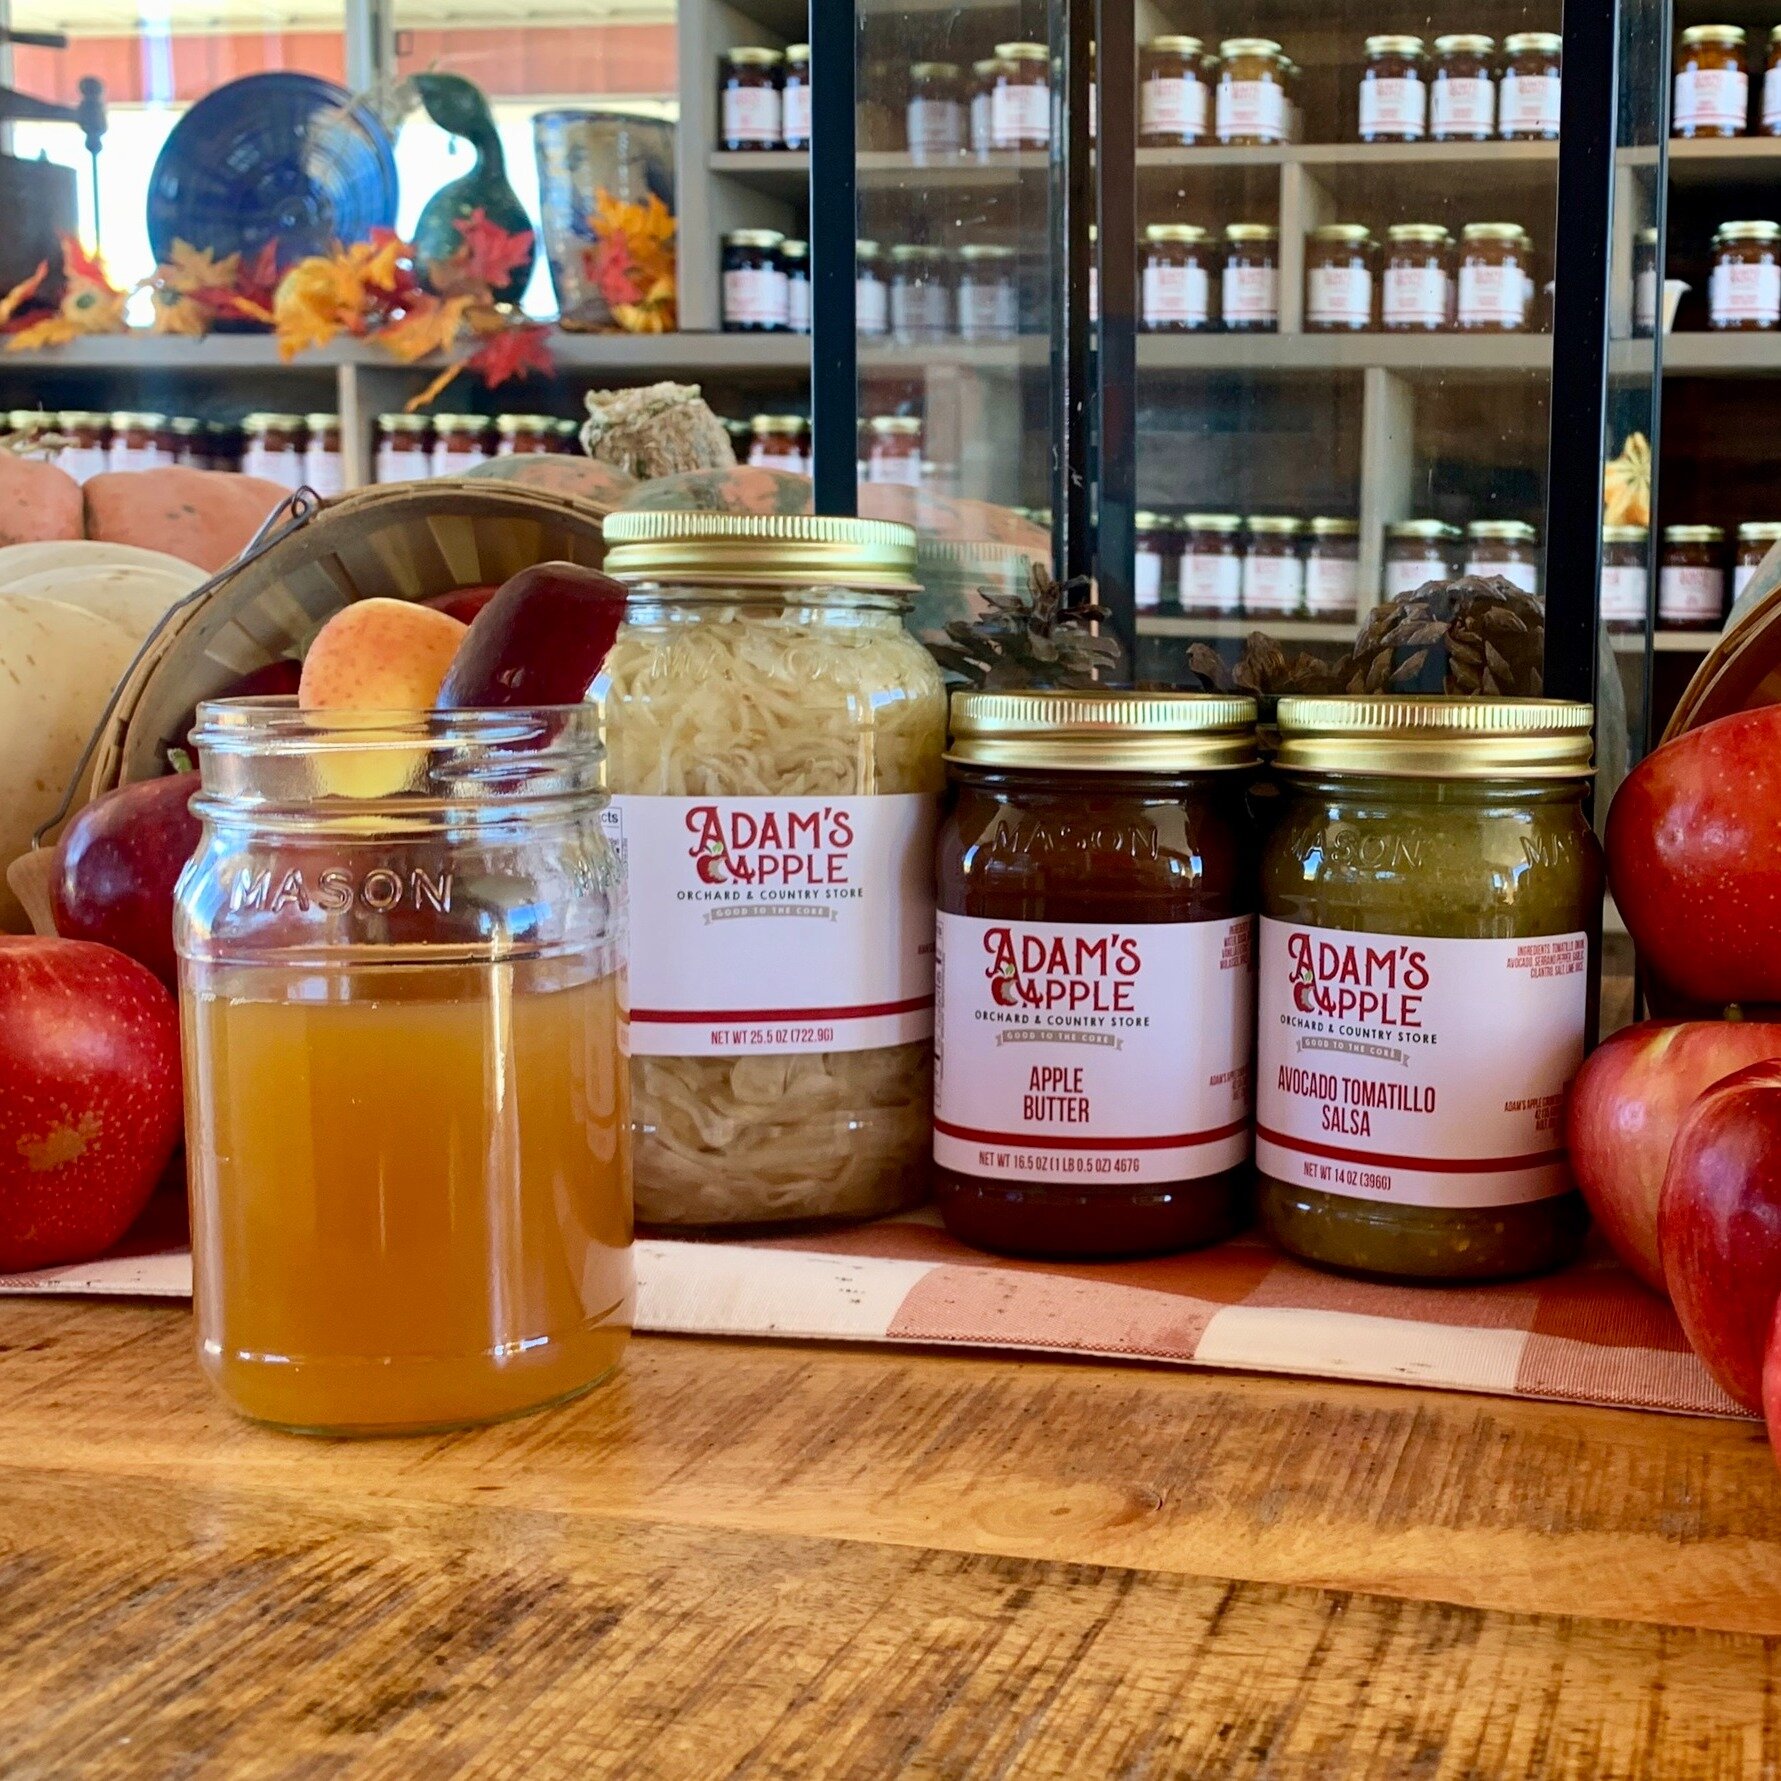 * APPLE CIDER - LAST PRESS OF THE SEASON, all APPLES $1/LB * 

Adam's Apple Orchard and Country Store WILL BE OPEN this FRIDAY and SATURDAY, November 17th and 18th from 10:00-4:00.  Fresh APPLE CIDER - the final pressing of the season, is available f